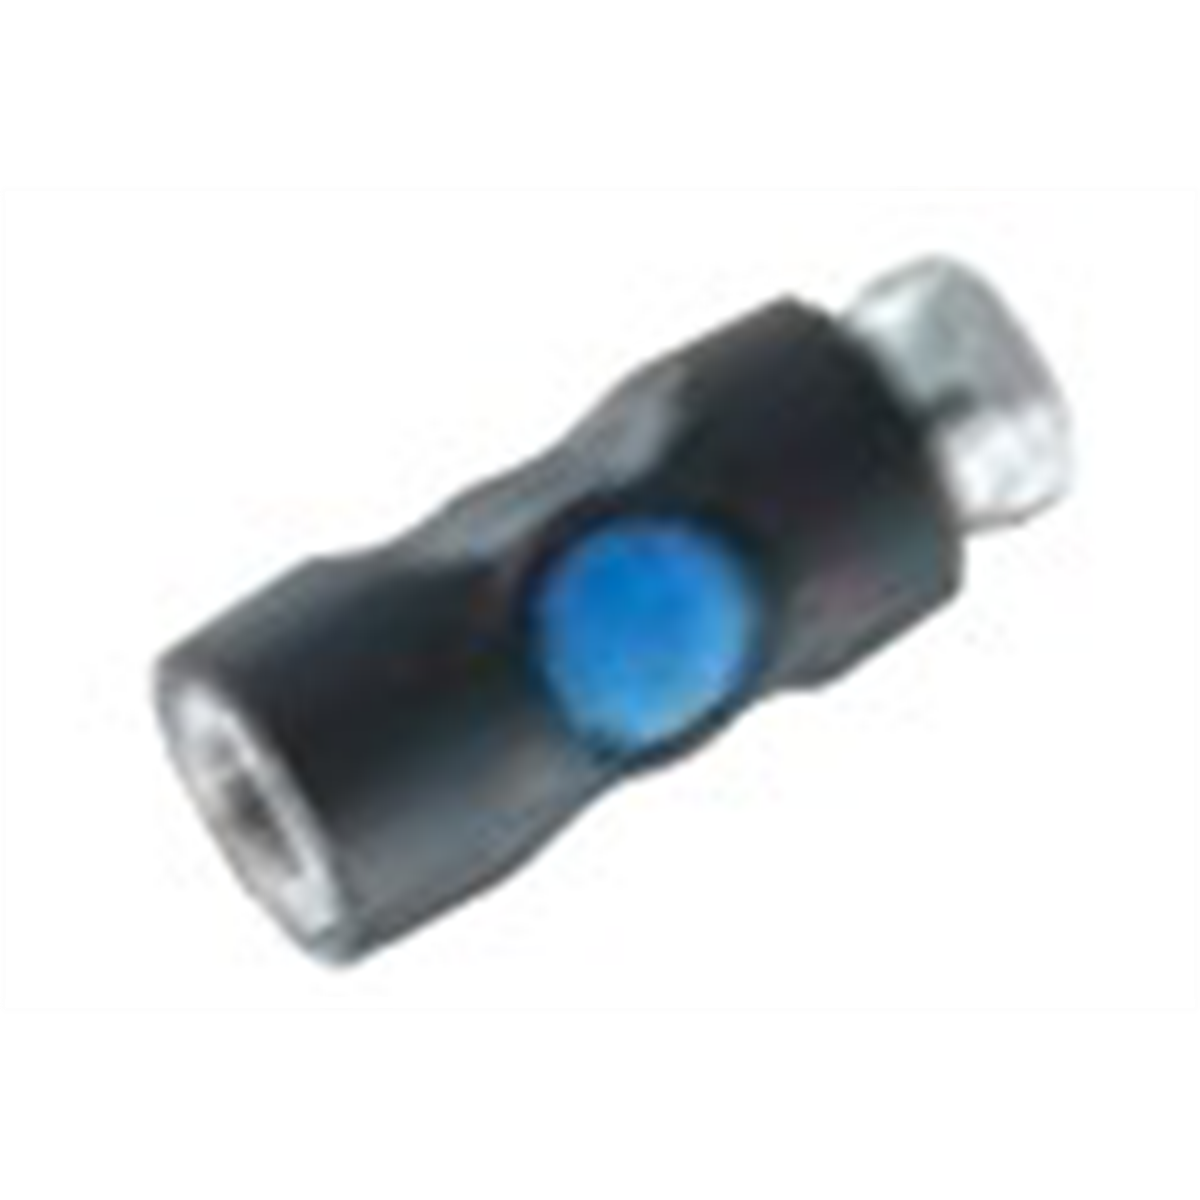 1/4 BODY INDUSTRIAL PROFILE SAFETY COUPLER